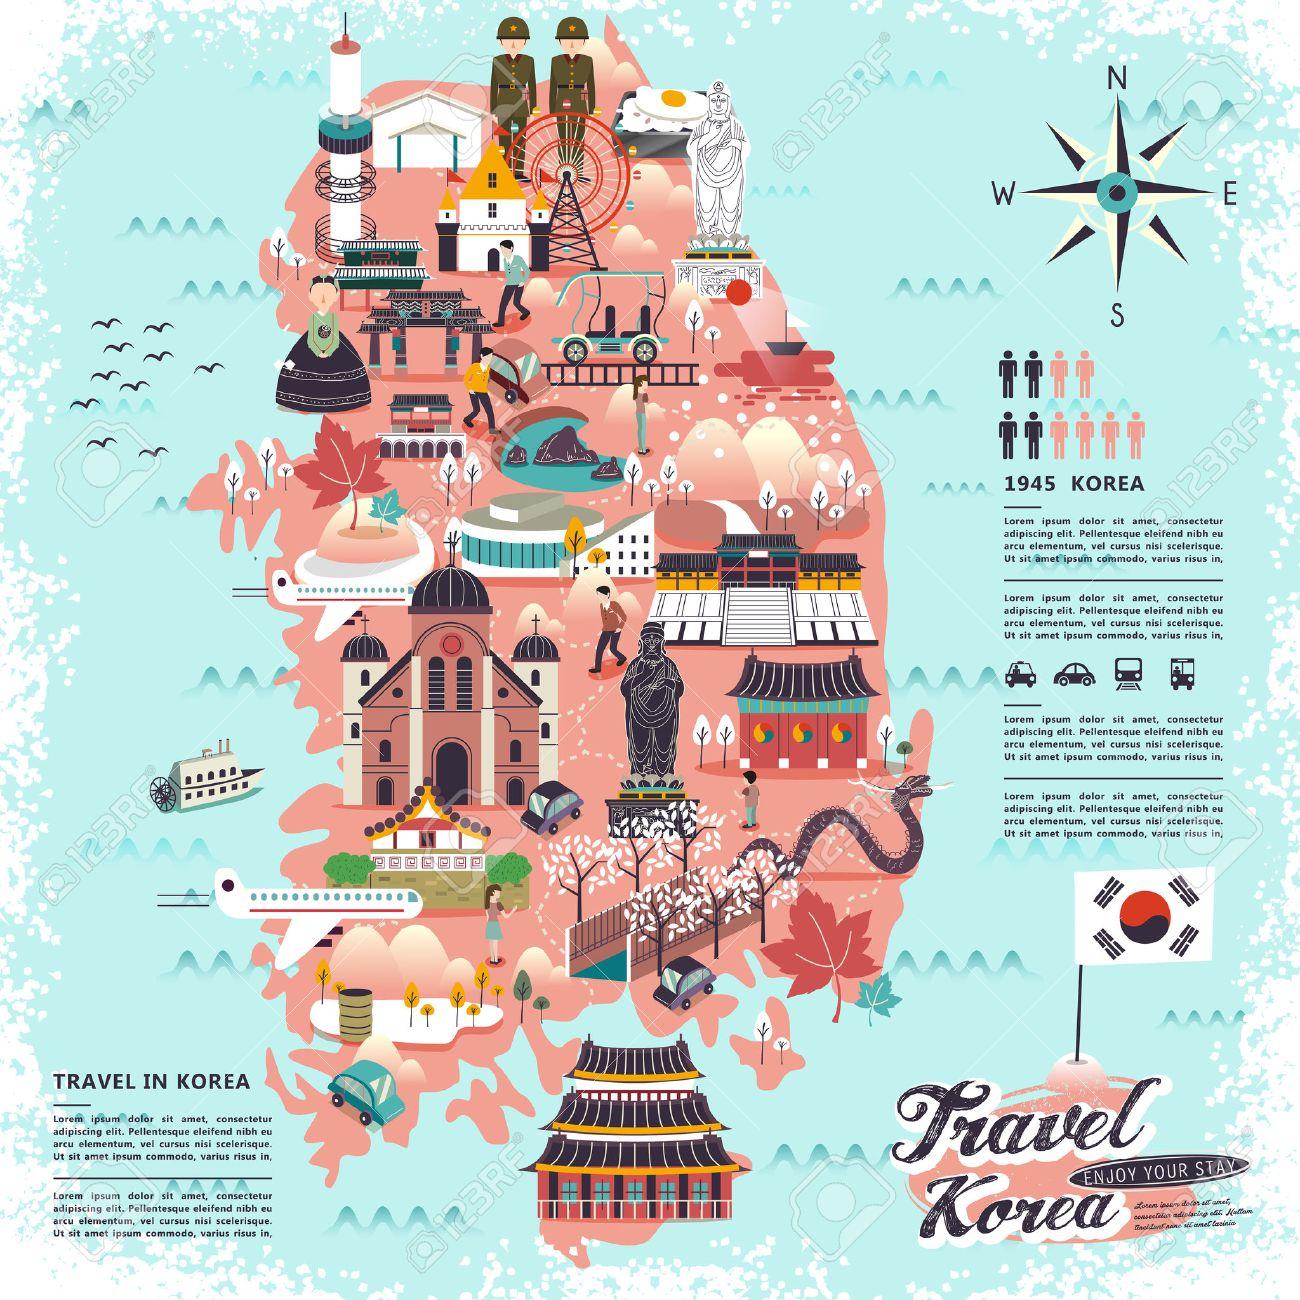 South Korea Travel Map Tourist Map Of South Korea (Rok): Tourist Attractions And Monuments Of South  Korea (Rok)